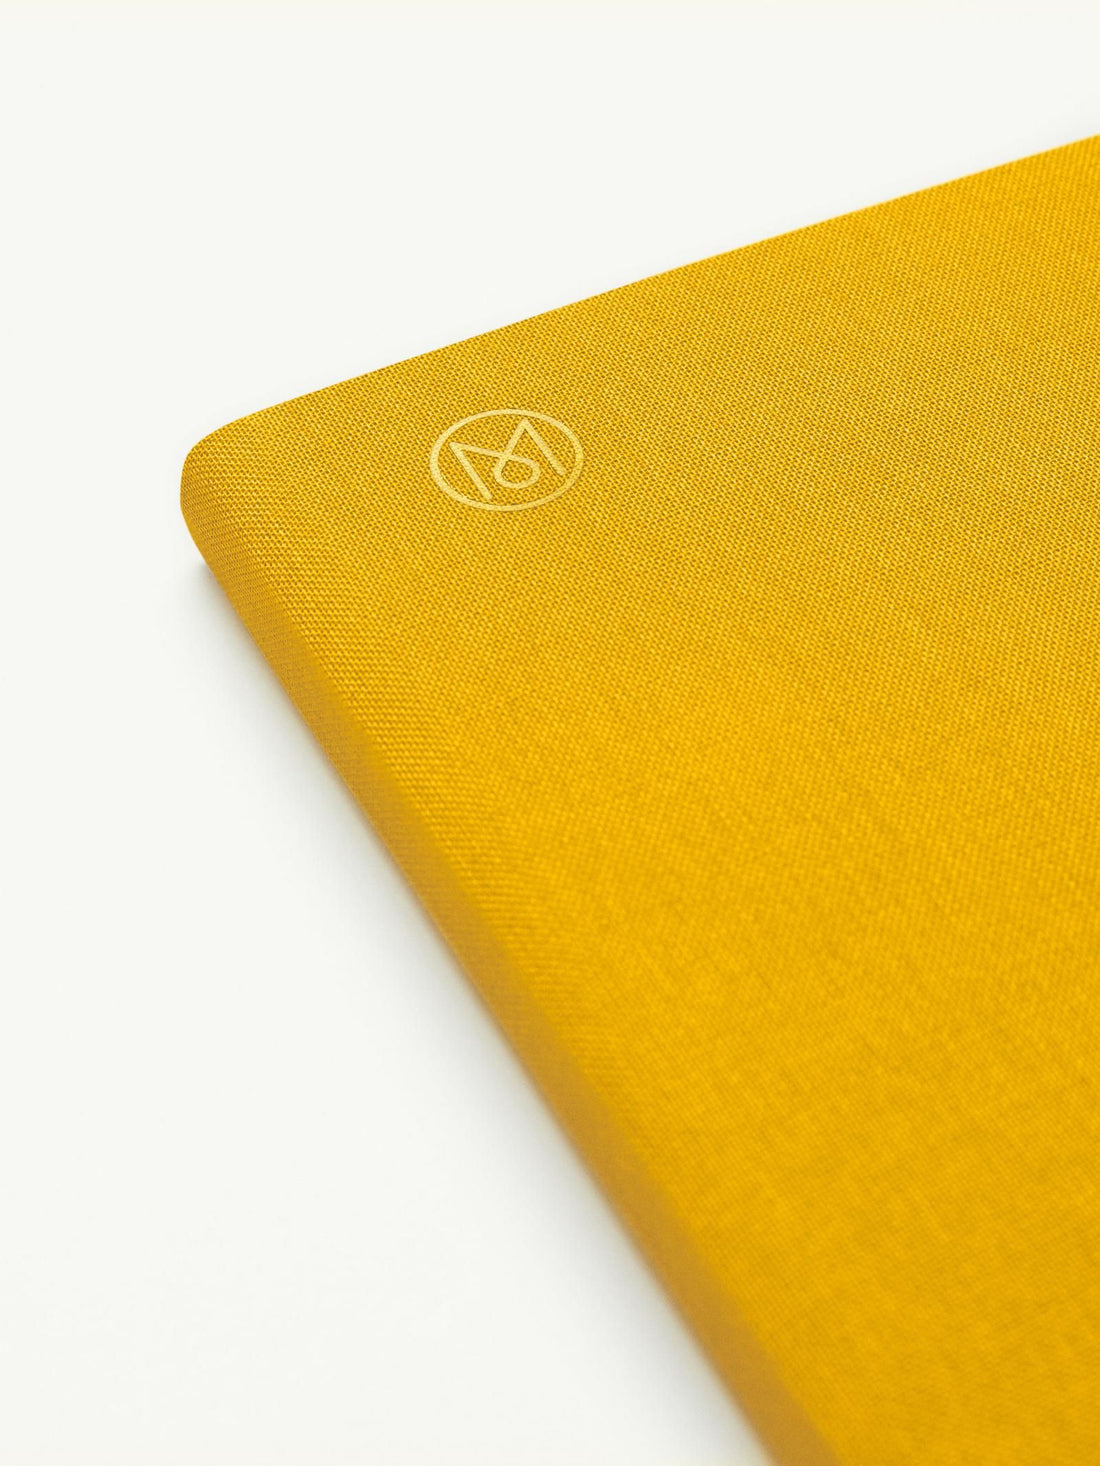 Monocle Hardcover Notebook A6 - Yellow